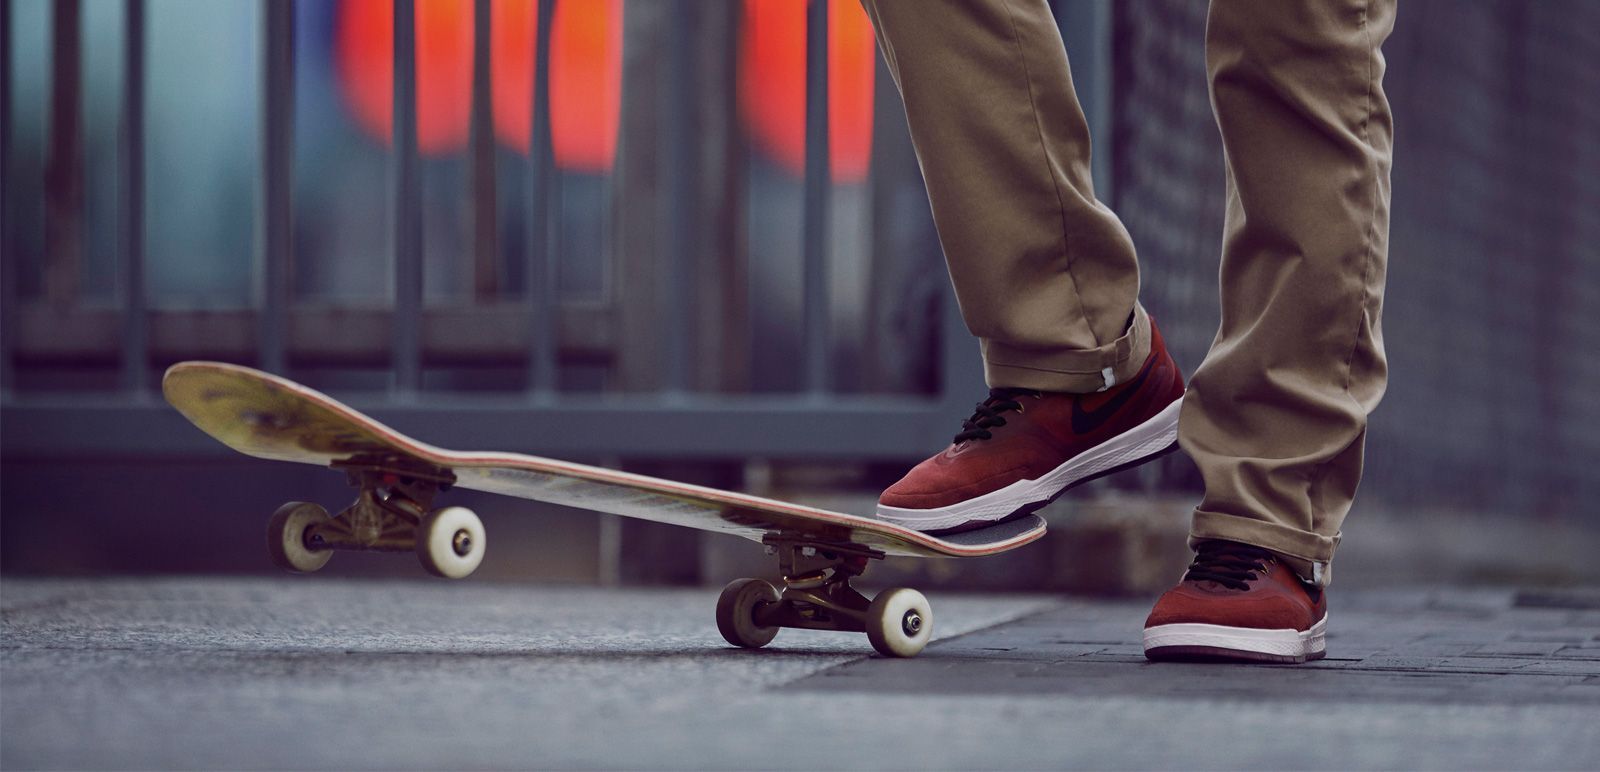  Nike SB skate shoes are made with innovative technology to provide skaters with the best possible boardfeel.